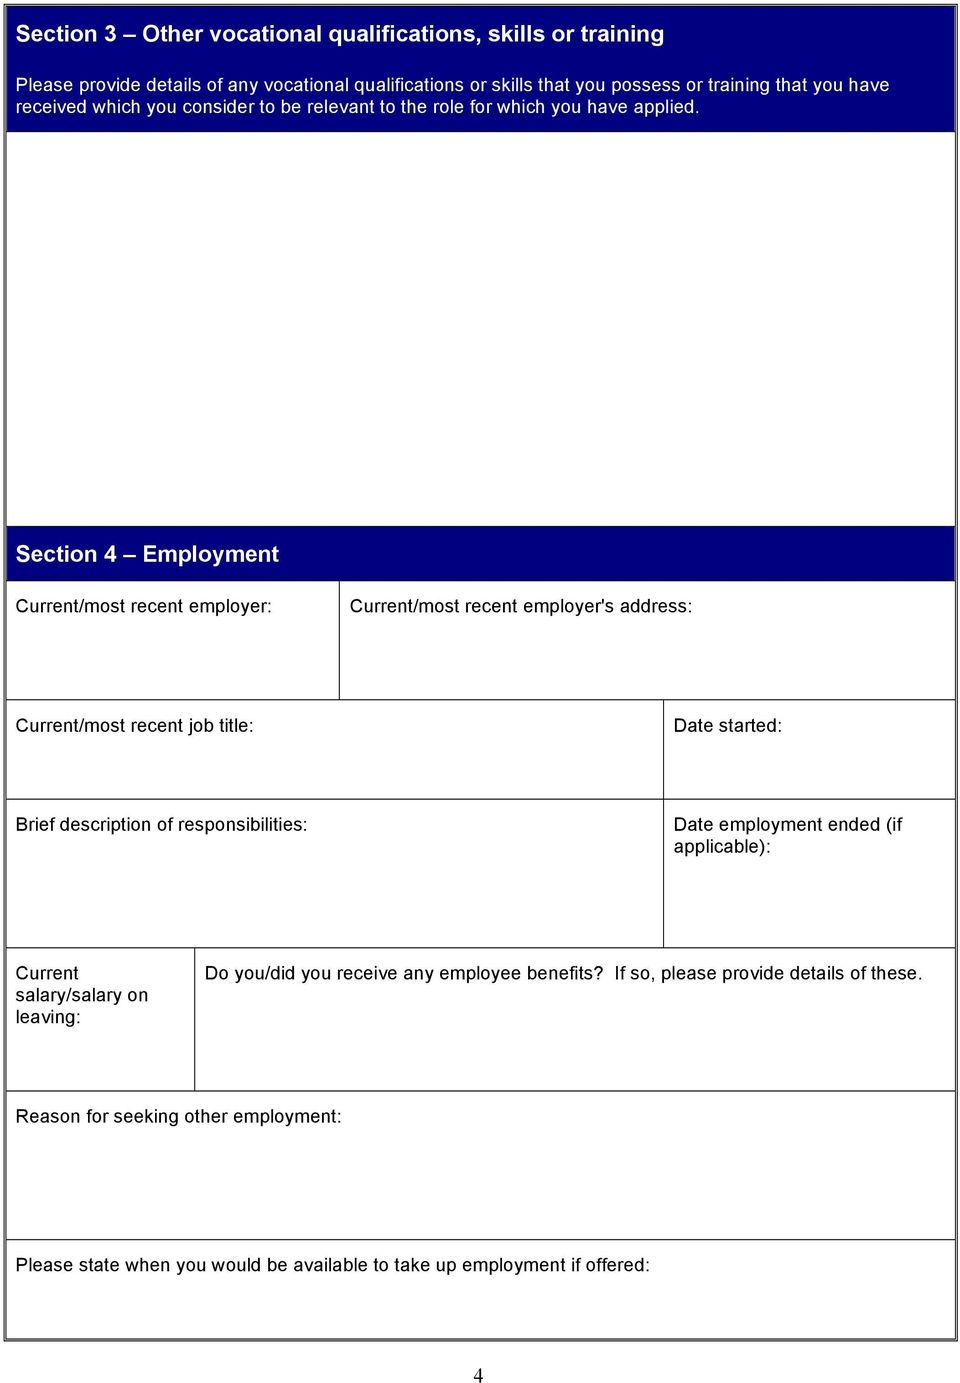 Section 4 Employment Current/most recent employer: Current/most recent employer's address: Current/most recent job title: Date started: Brief description of responsibilities: